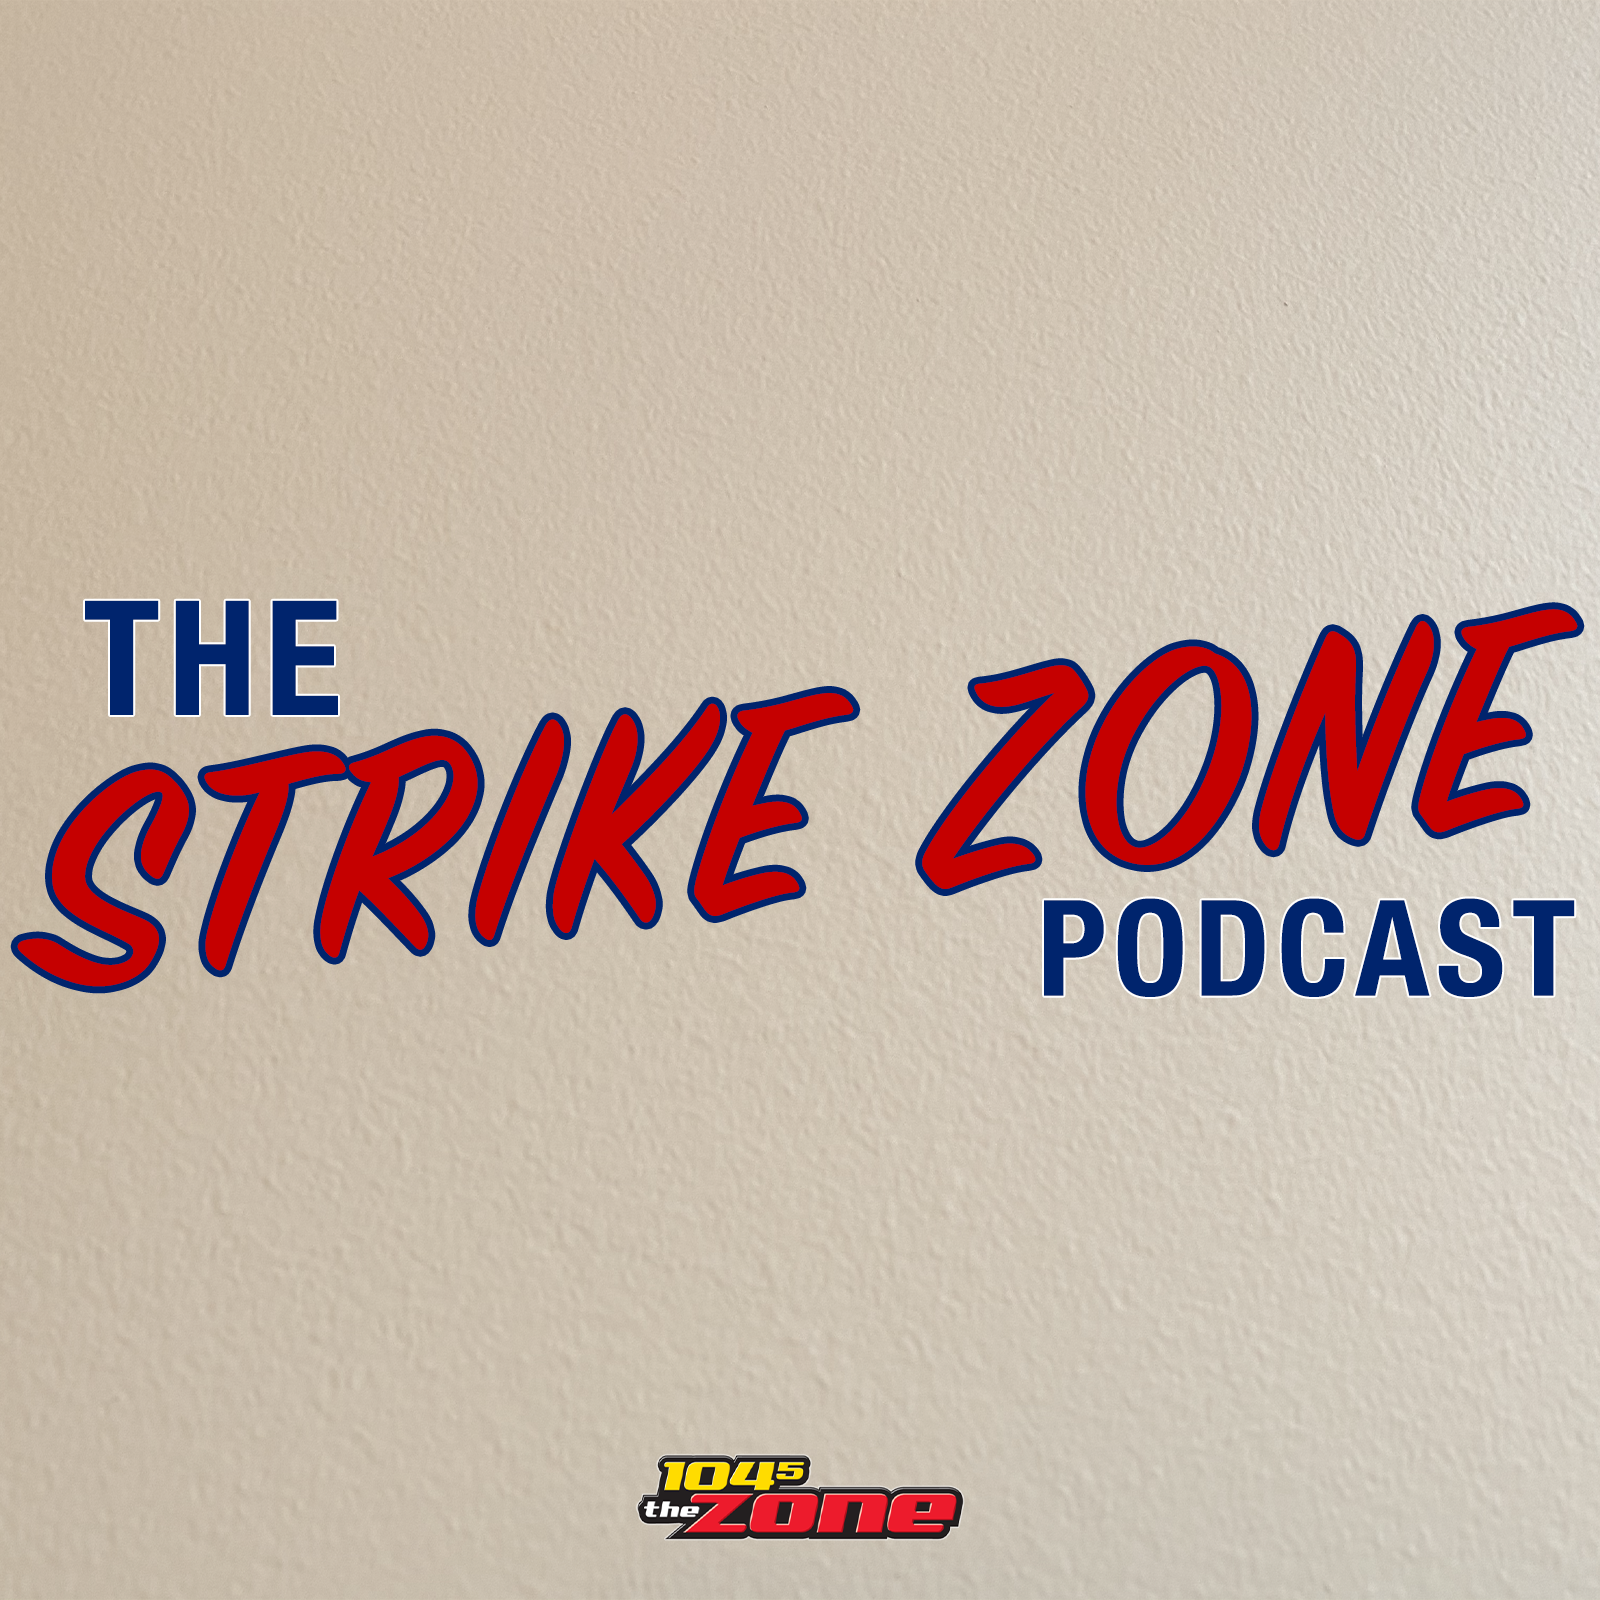 The Wander Franco Story is Just Weird | The Strike Zone